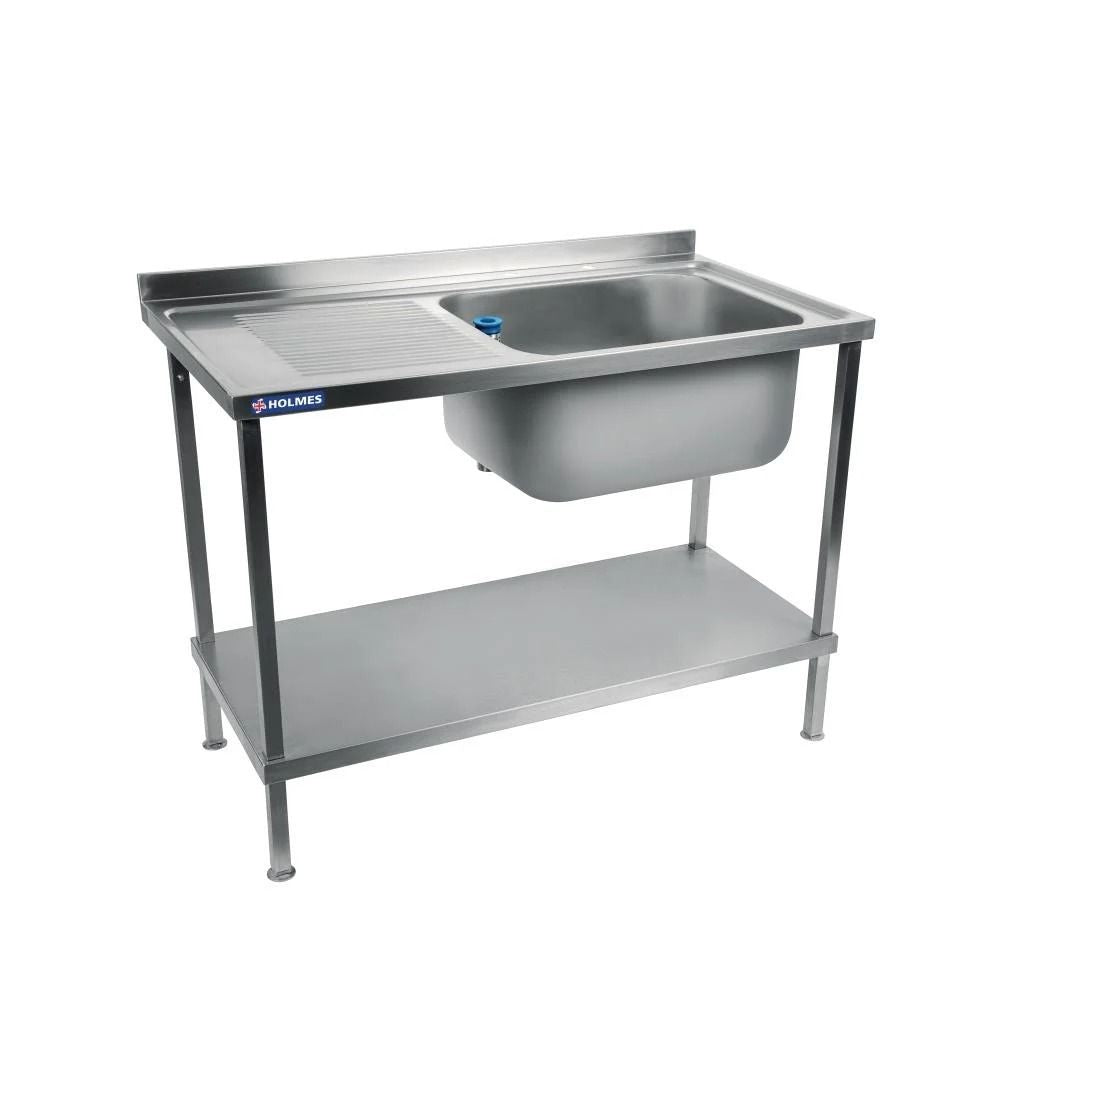 Holmes Fully Assembled Stainless Steel Sink Left Hand Drainer 1200mm - DR387